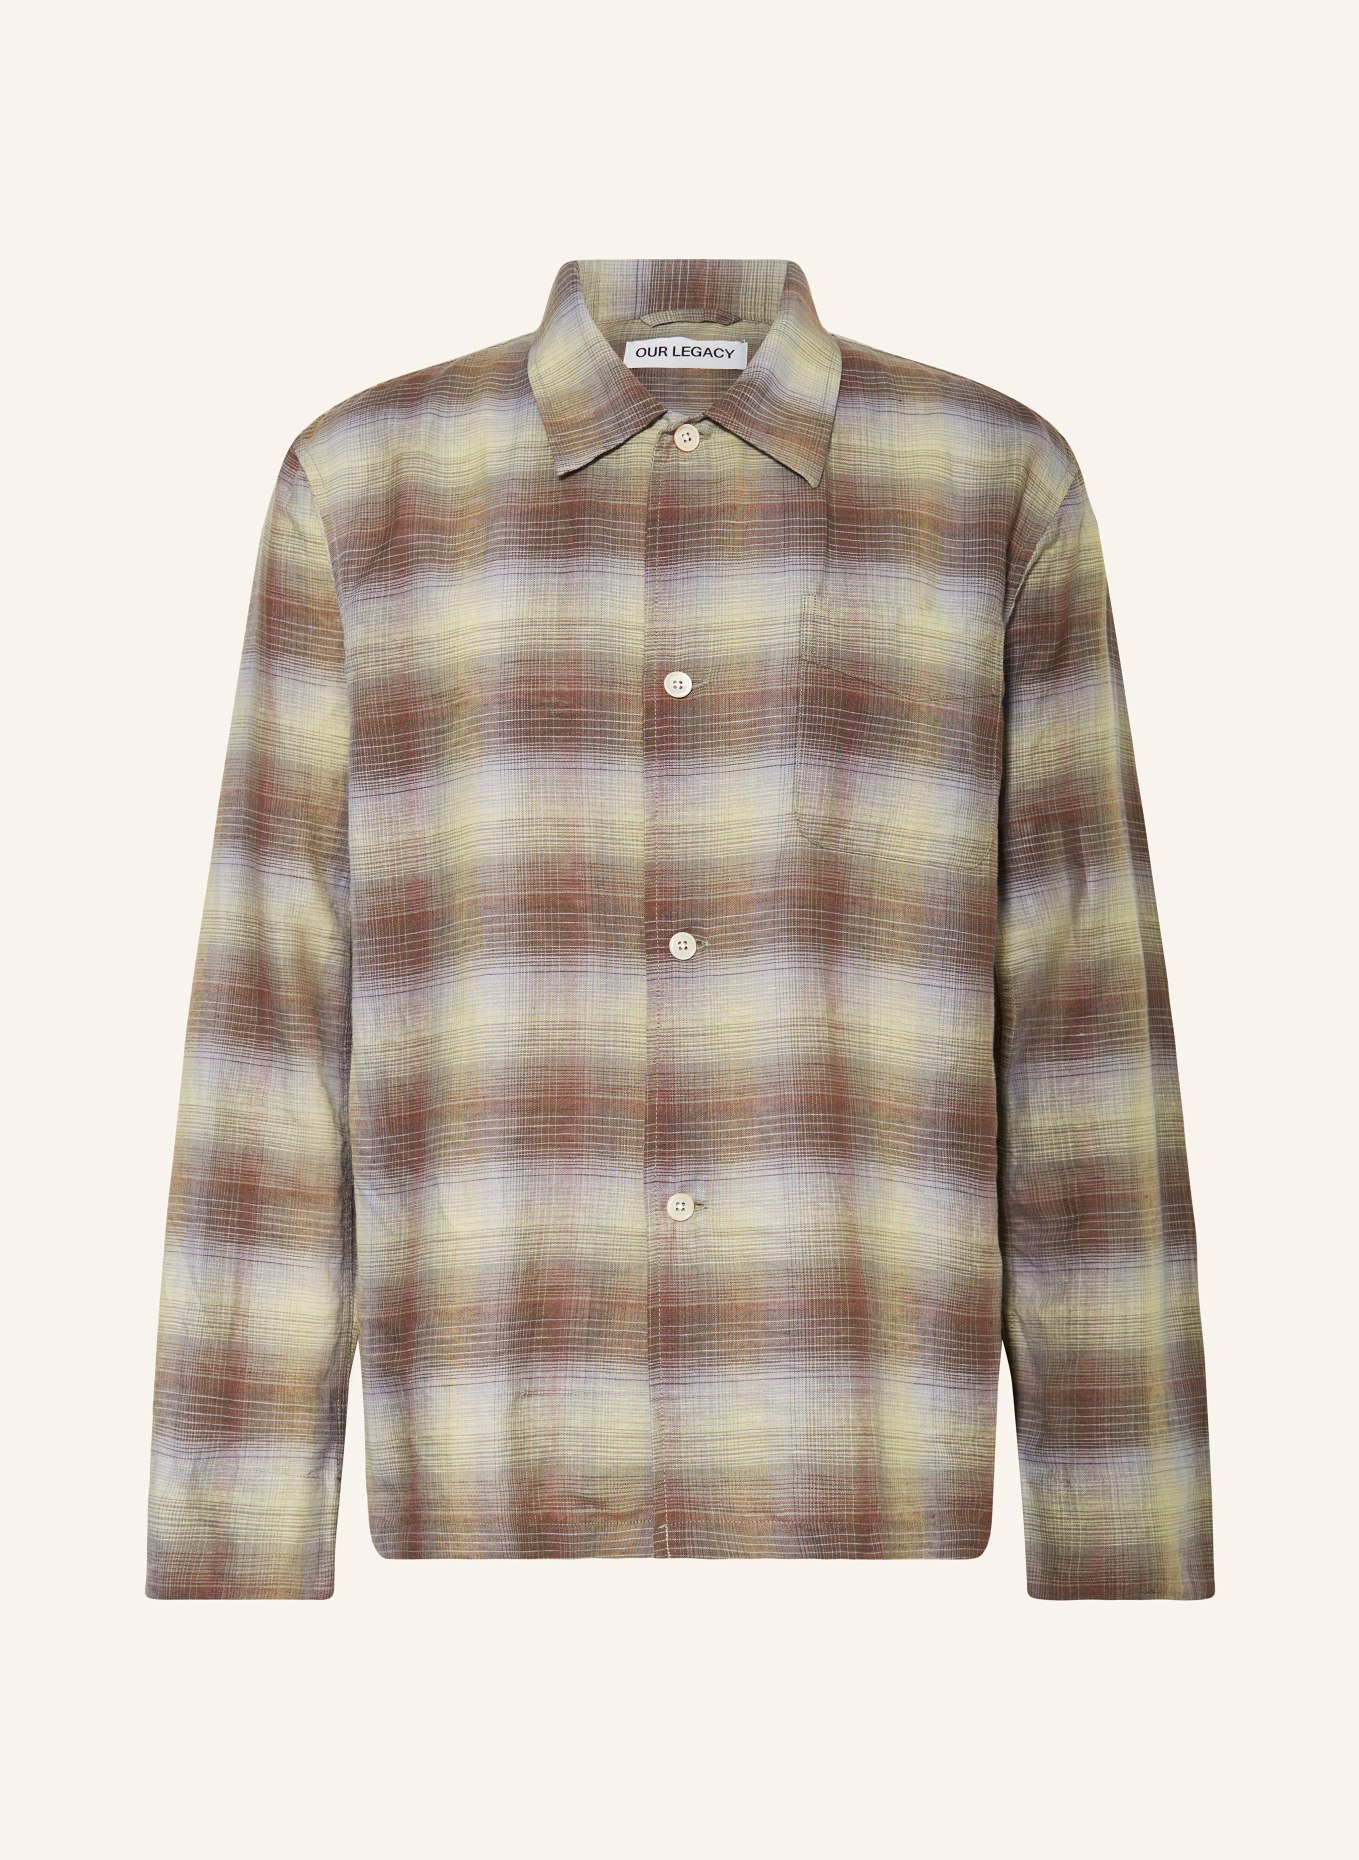 OUR LEGACY Shirt comfort fit with linen, Color: LIGHT GREEN/ BROWN/ LIGHT PURPLE (Image 1)